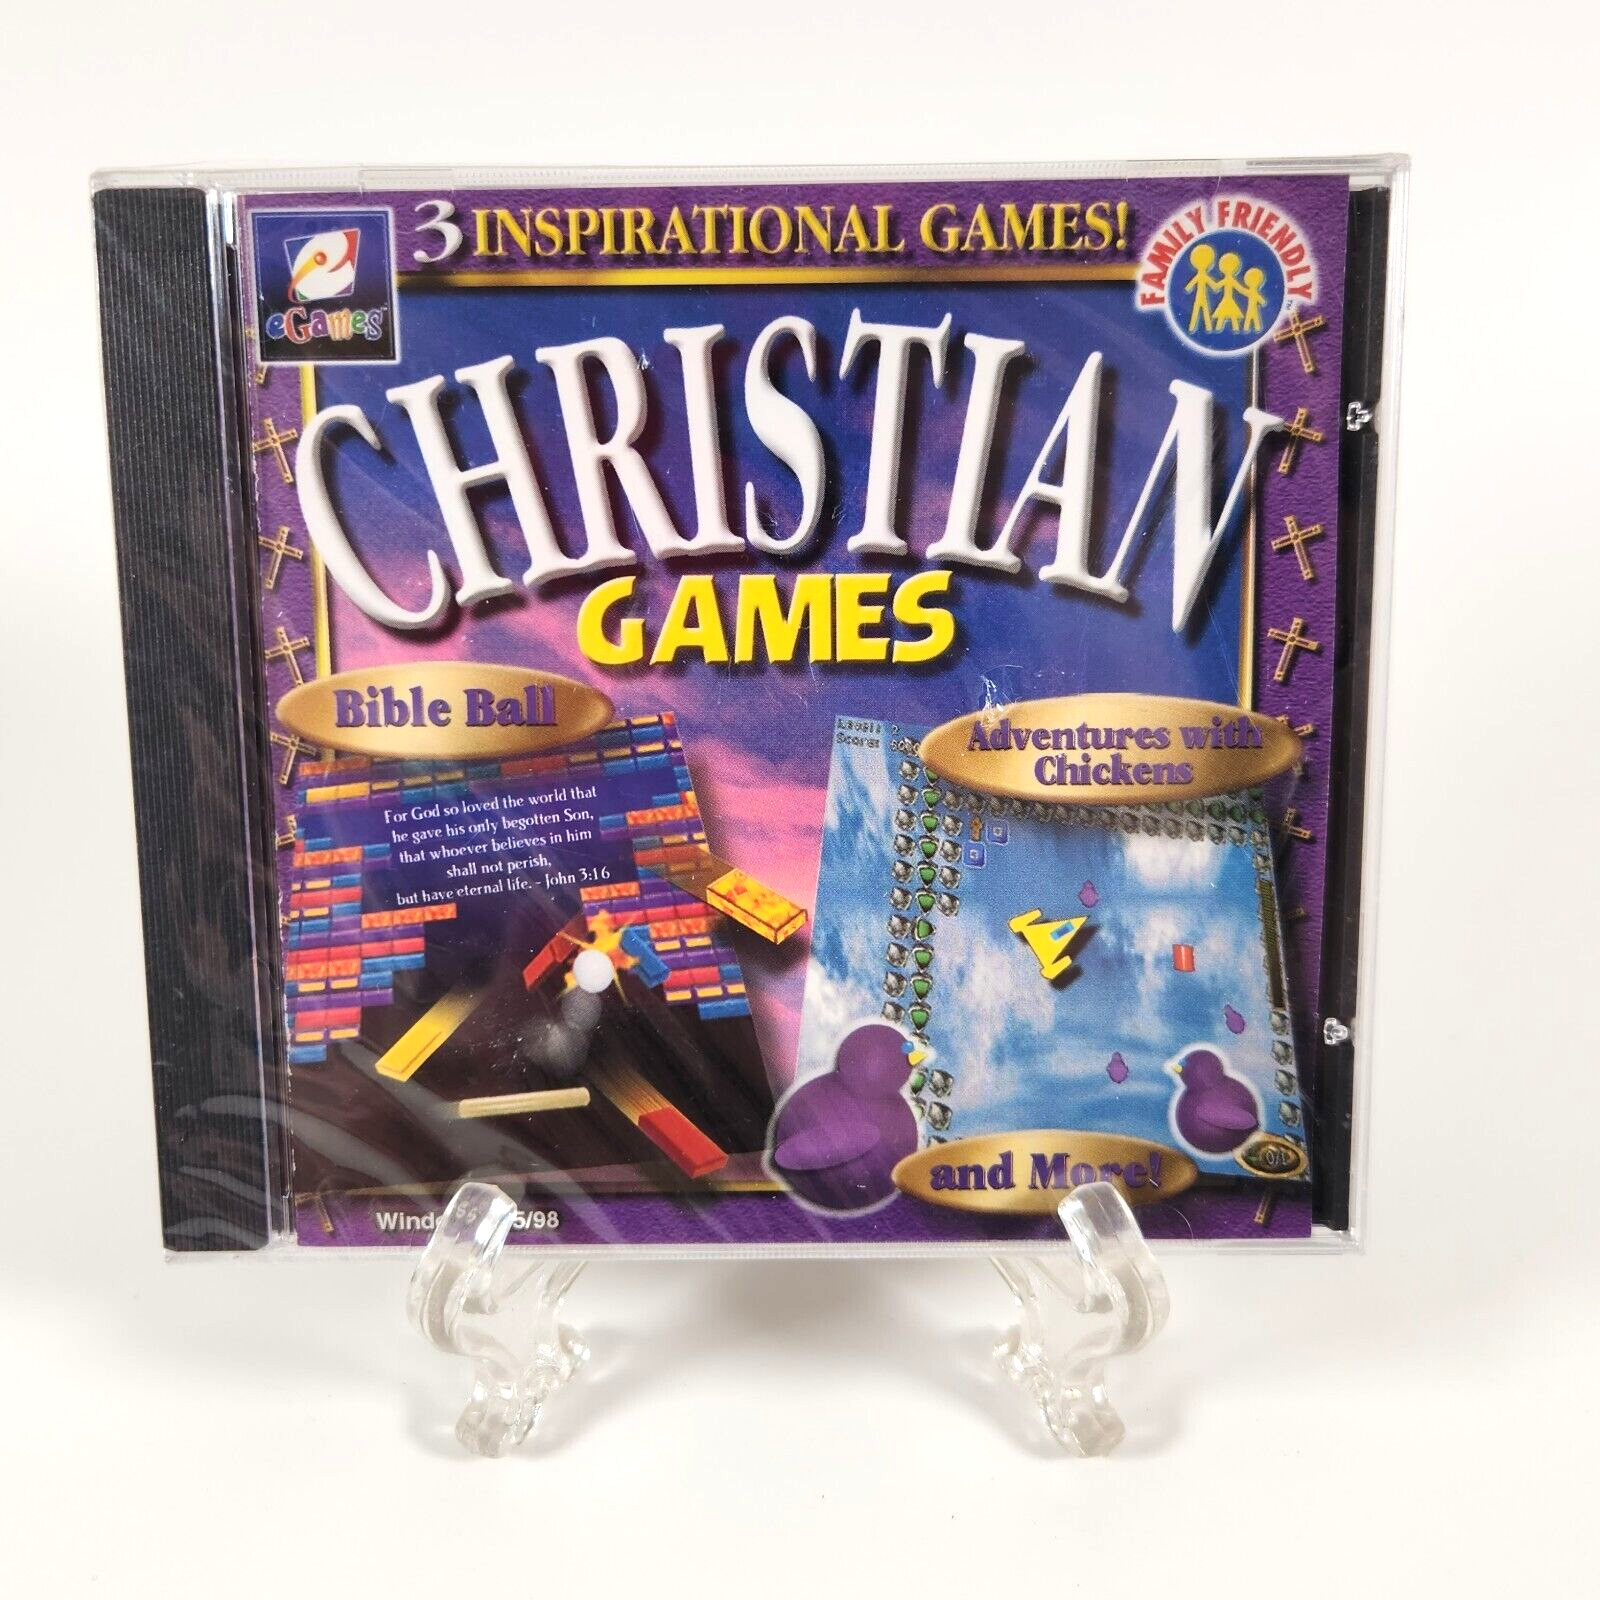 A boxed computer game titled "Christian Games," featuring three inspirational games, "Bible Ball," "Adventures with Chickens," and more. The package indicates it is family-friendly and is displayed on a clear plastic stand.